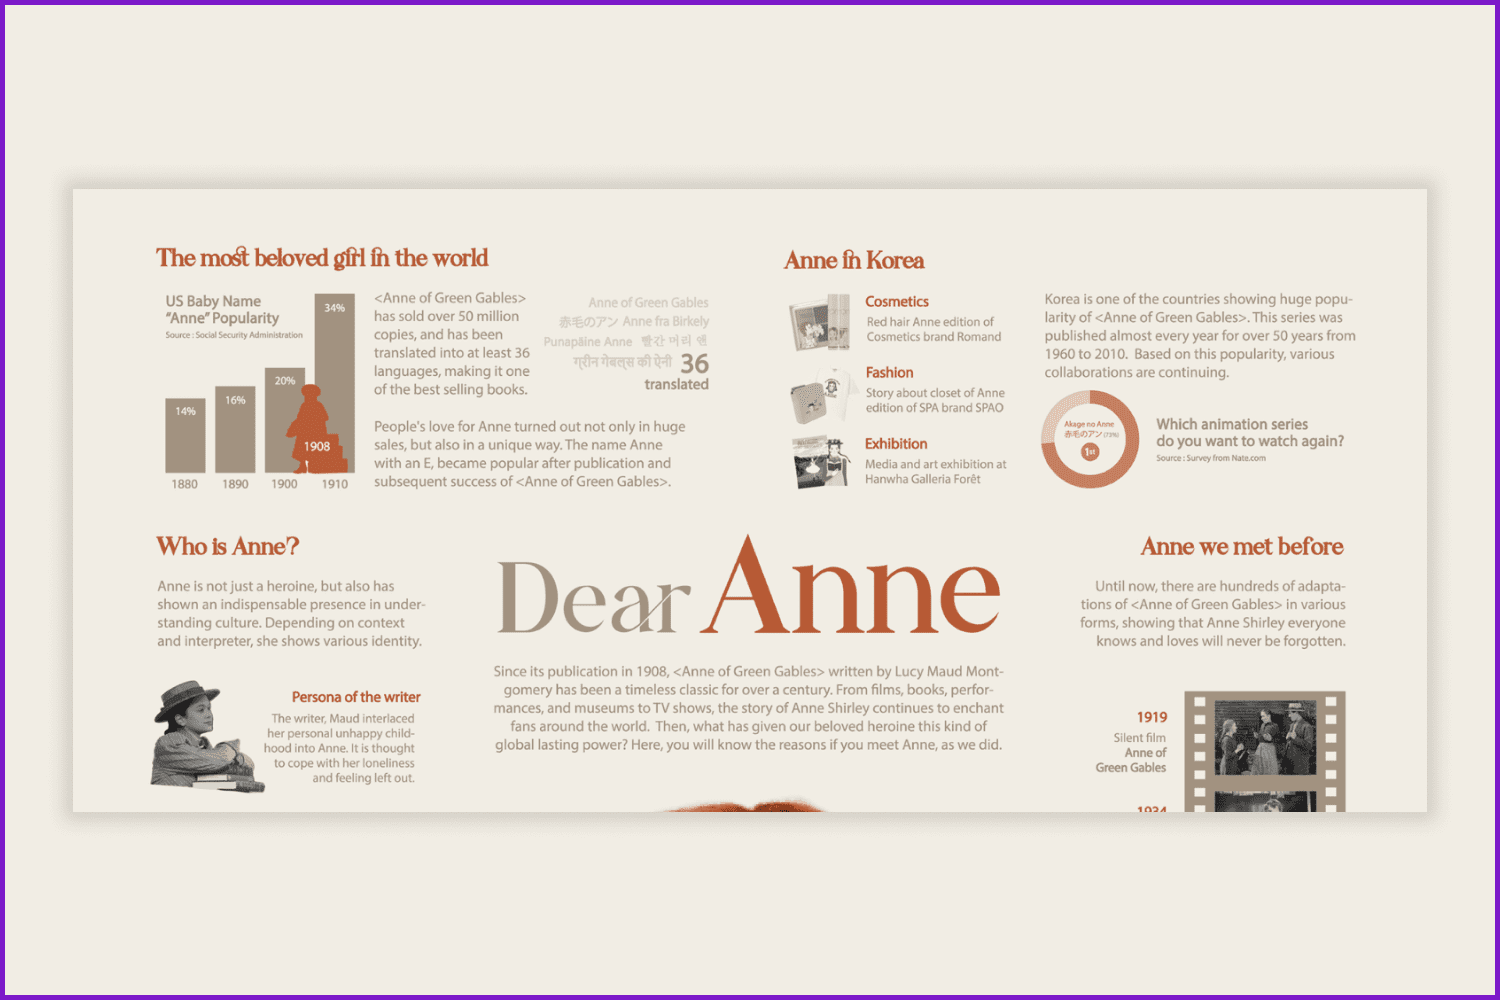 Name Anne in the World chart.